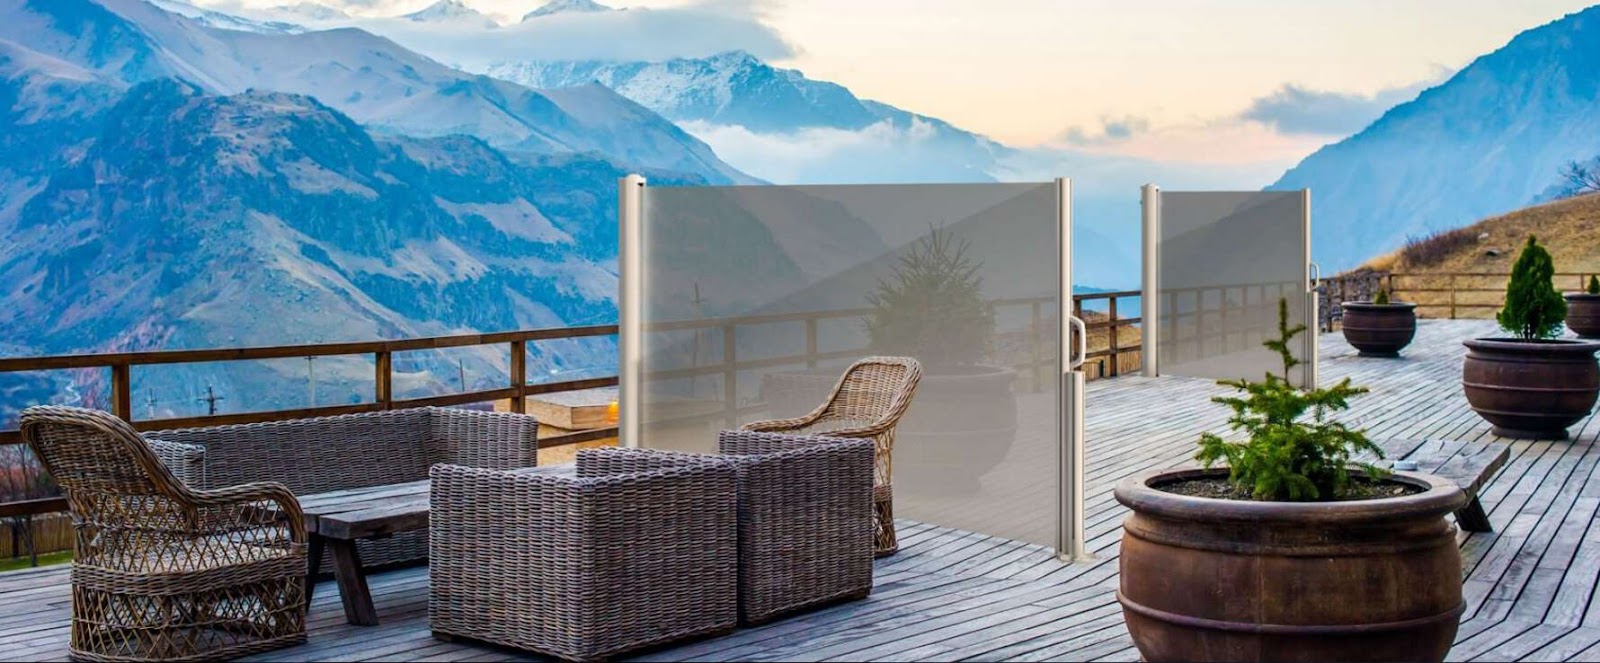 Horizontal screen on a patio overlooking mountains